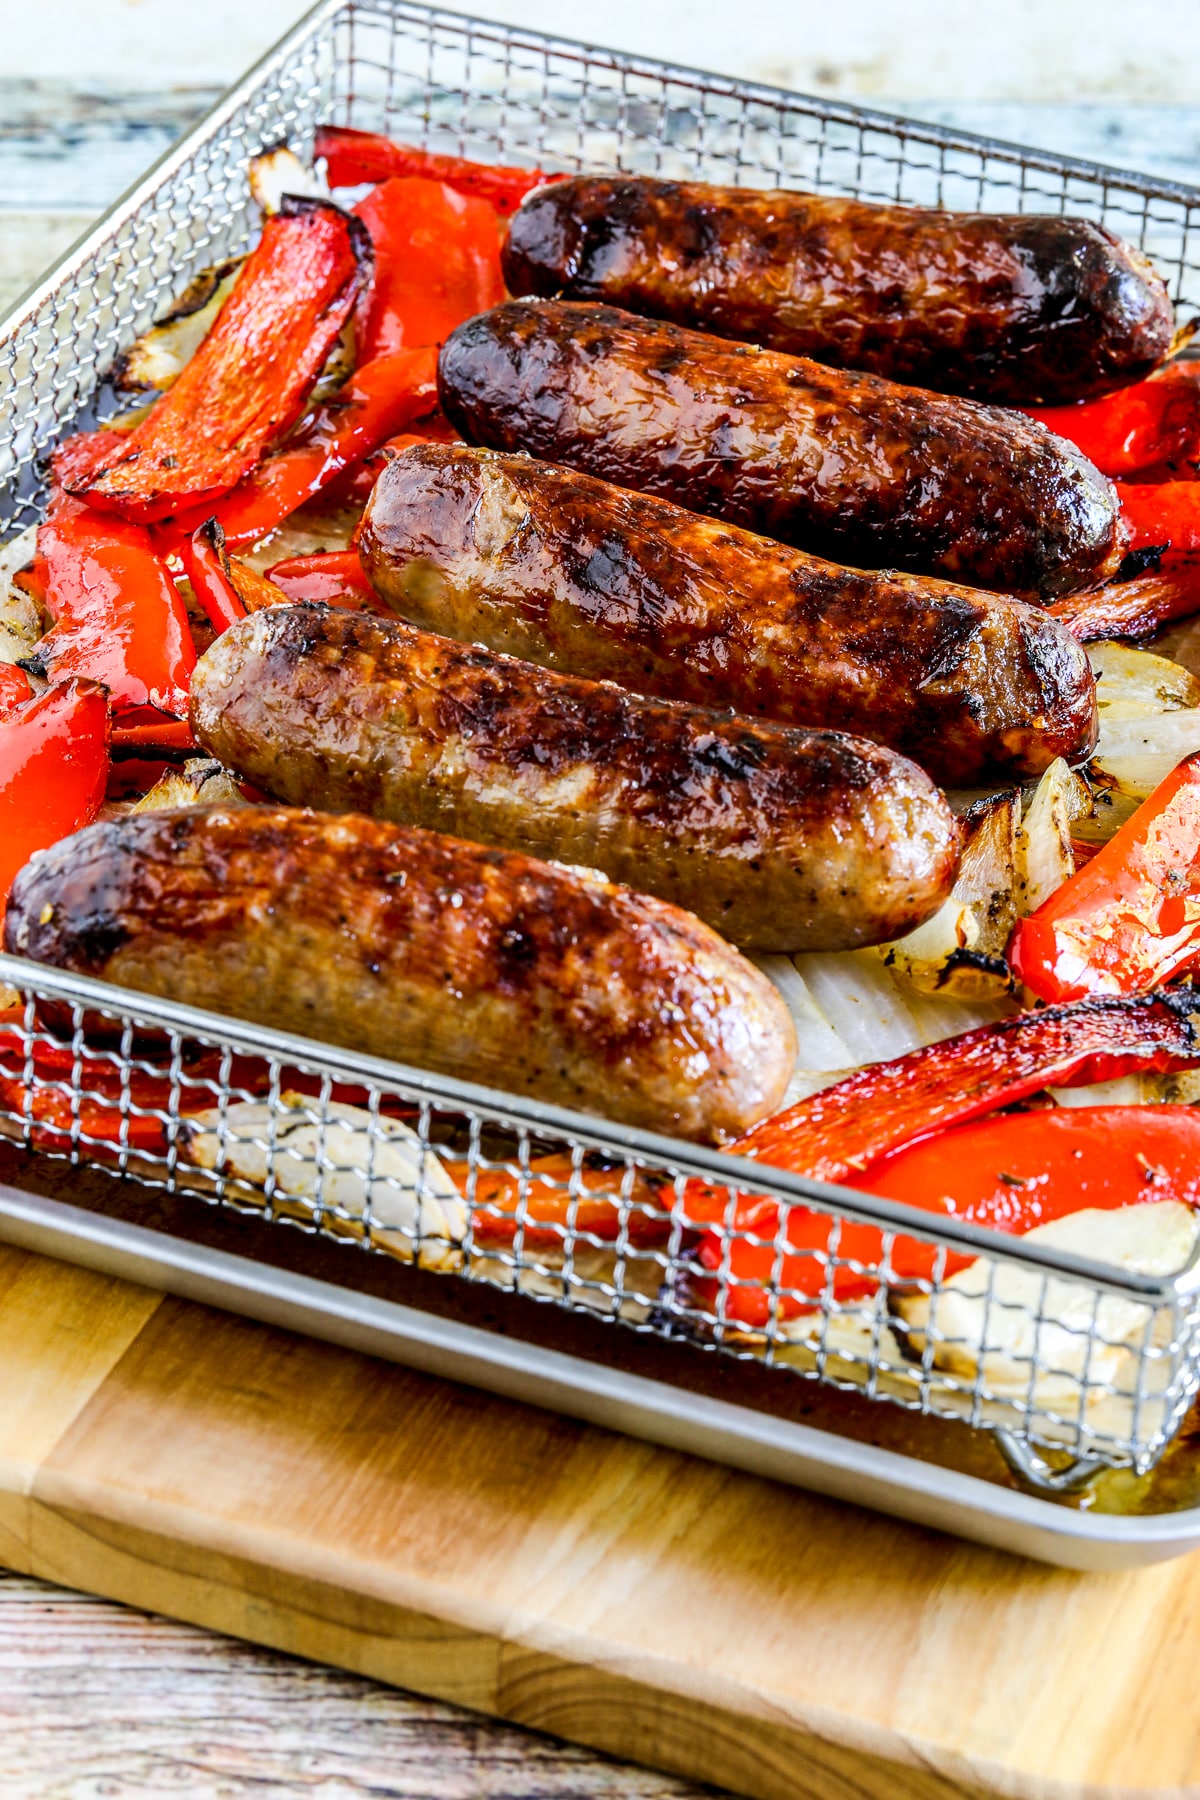 Air fryer sausage and pepper as shown in the air fryer basket after cooking